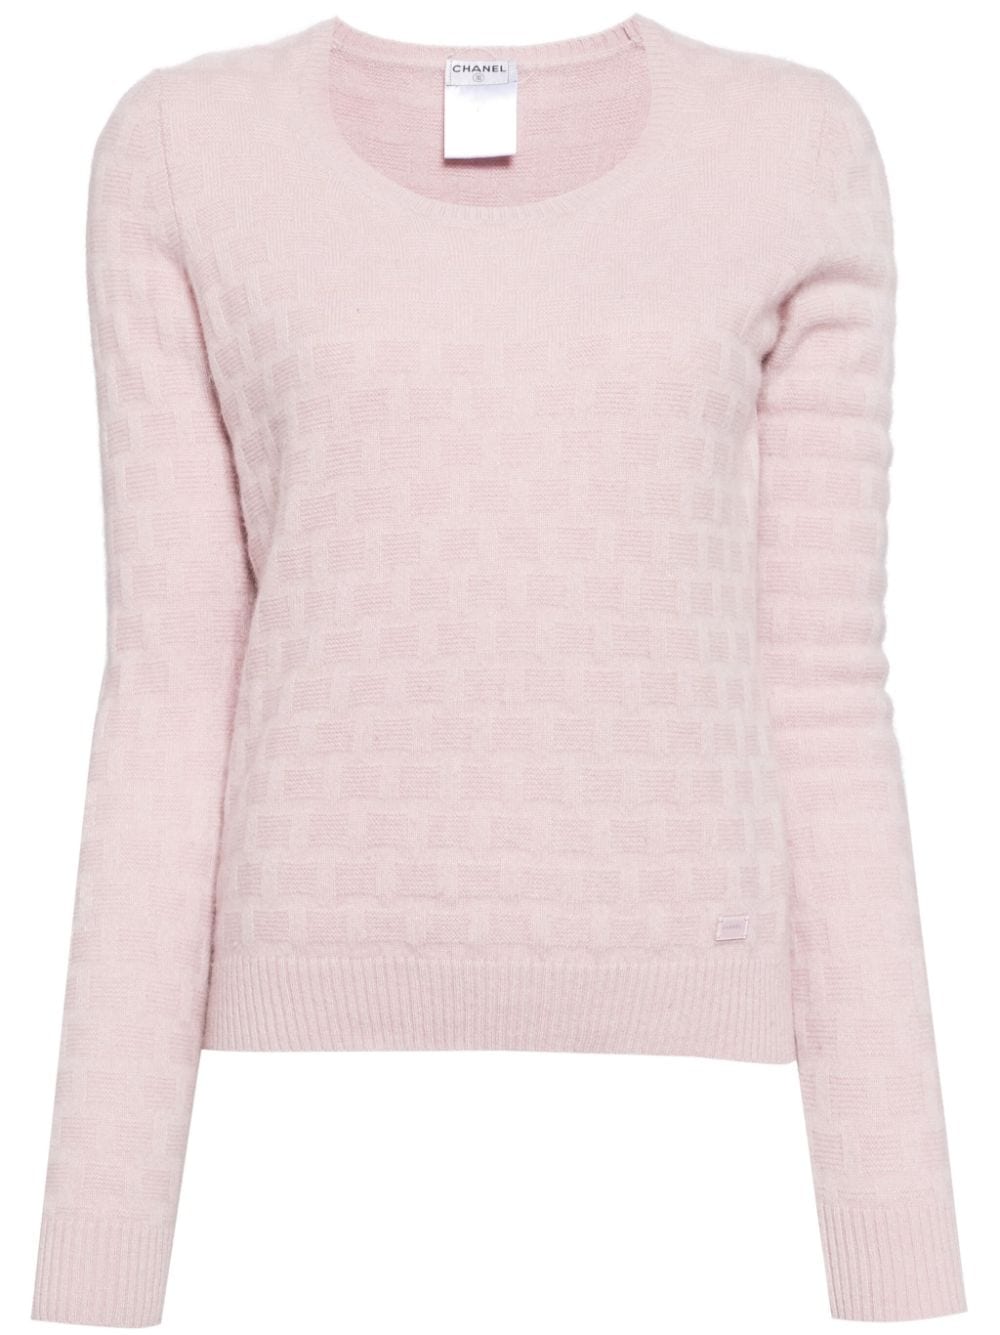 Pre-owned Chanel 2002 Textured Check Long-sleeved Cashmere Top In Pink